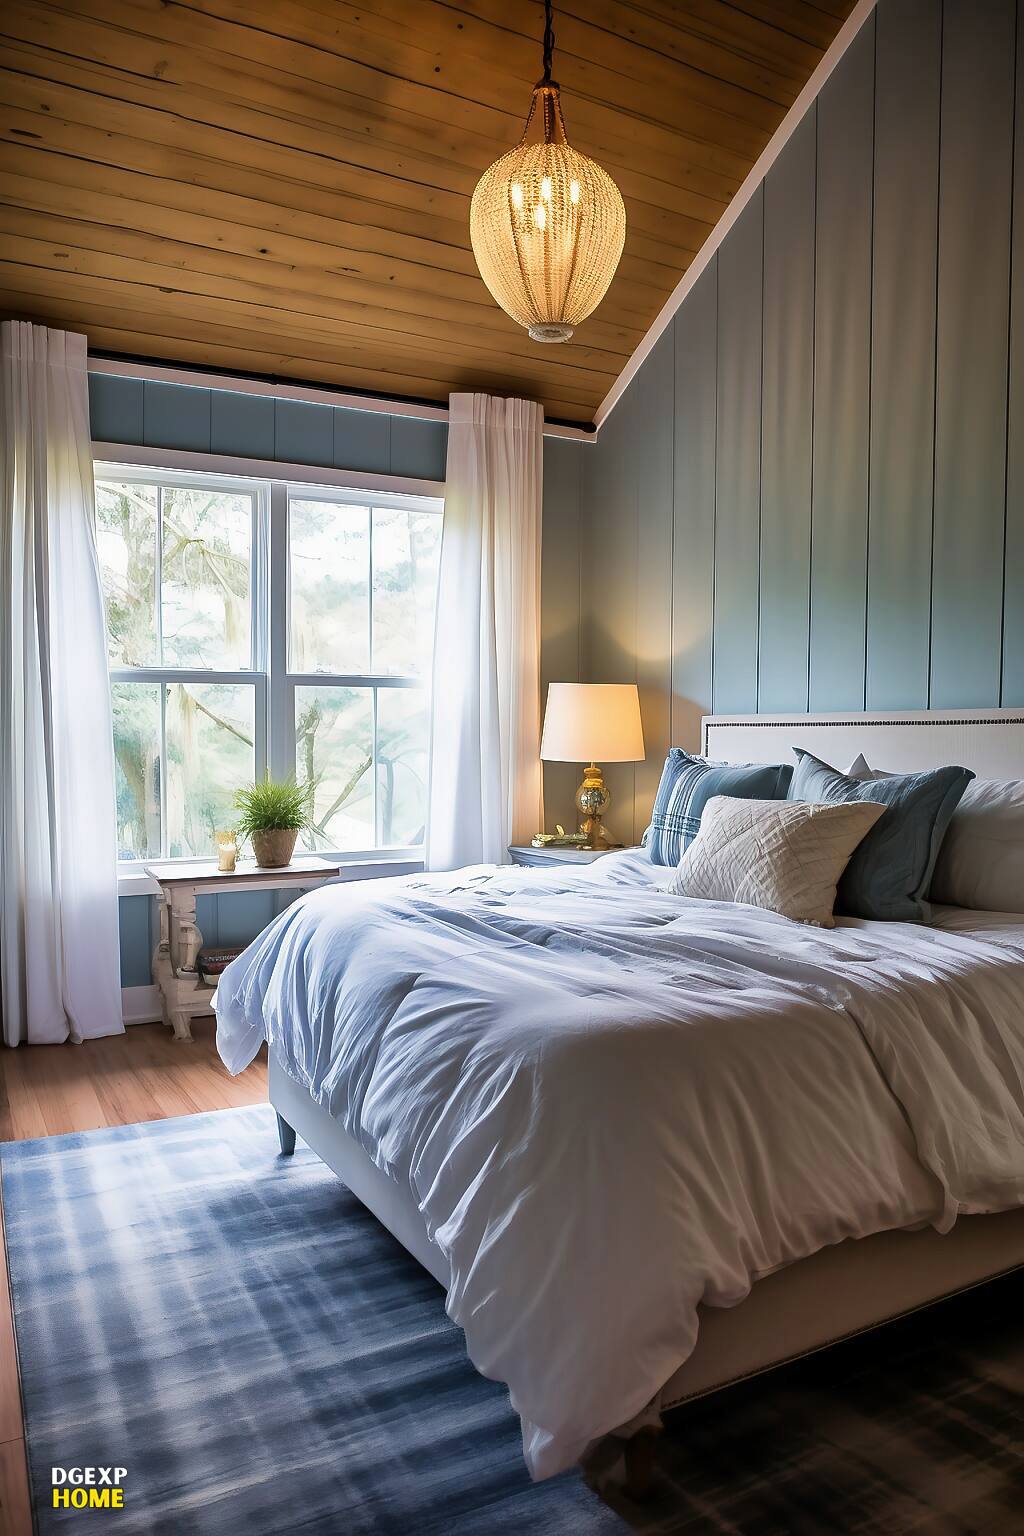 Spacious Farmhouse Bedroom With A Neutral Color Scheme And A Mix Of Modern And Rustic Elements.